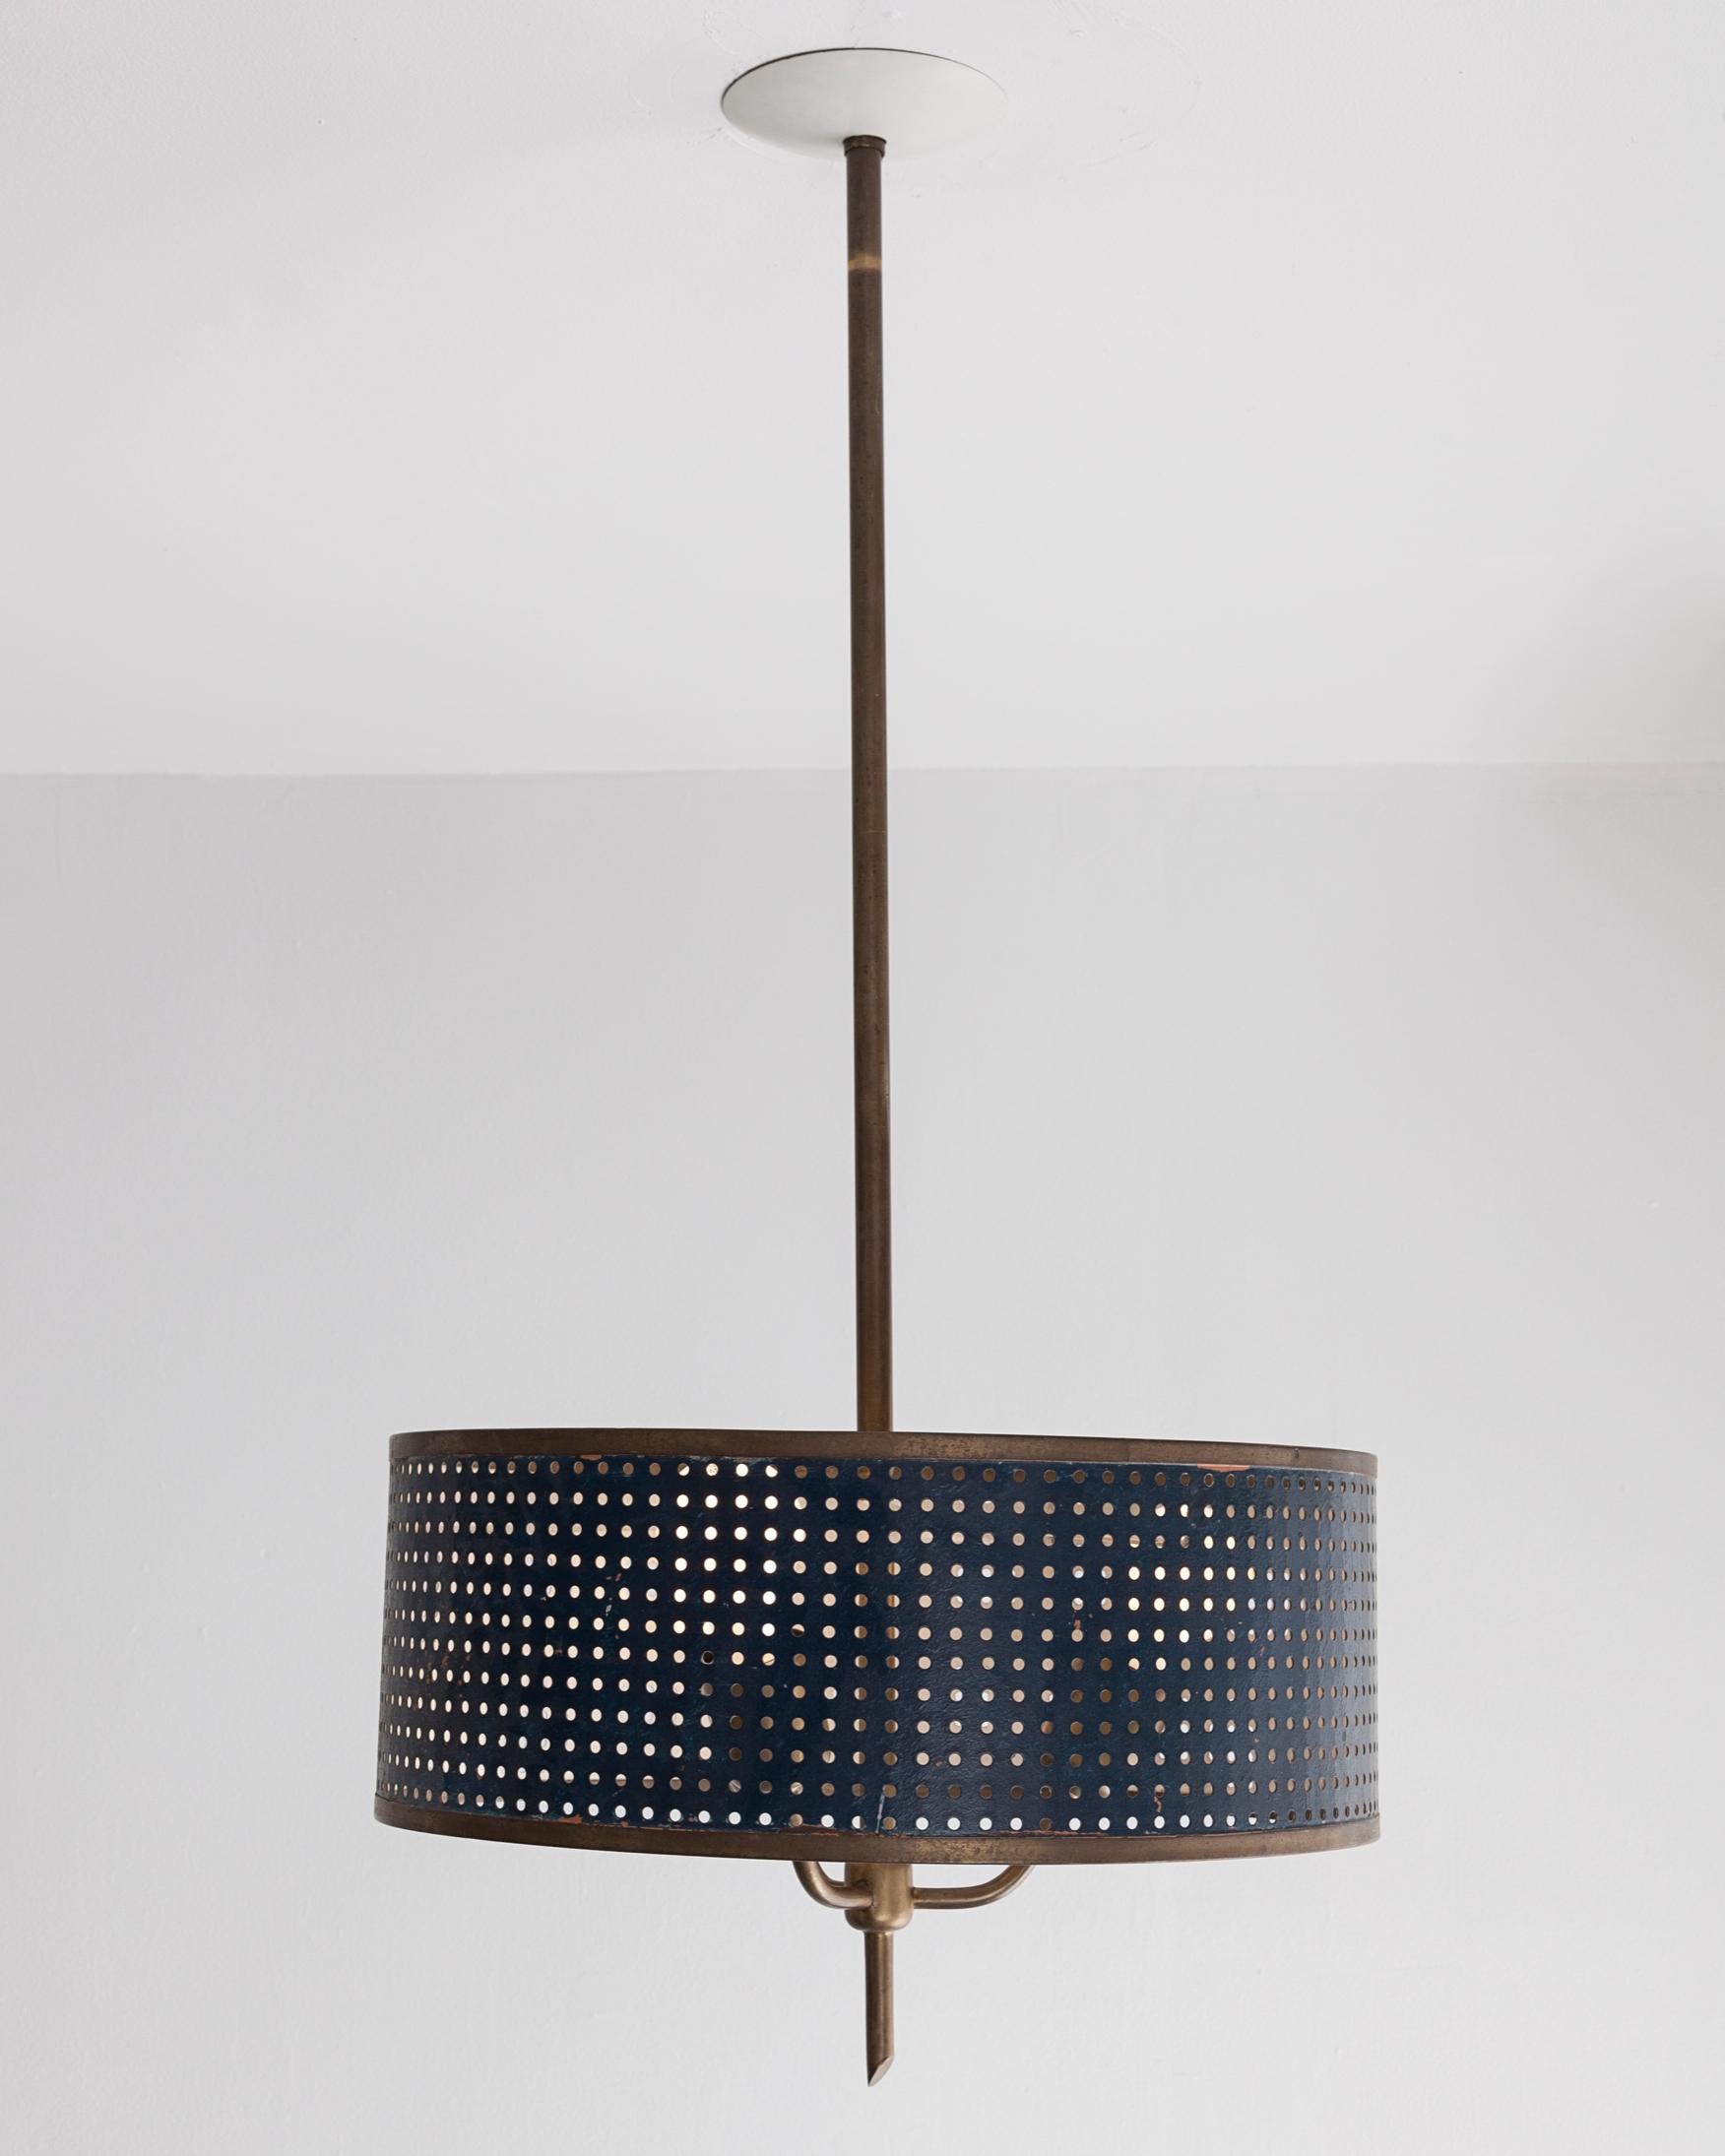 Hanging lamp with blue perforated metal shade. Possibly Argentina, circa 1960s.